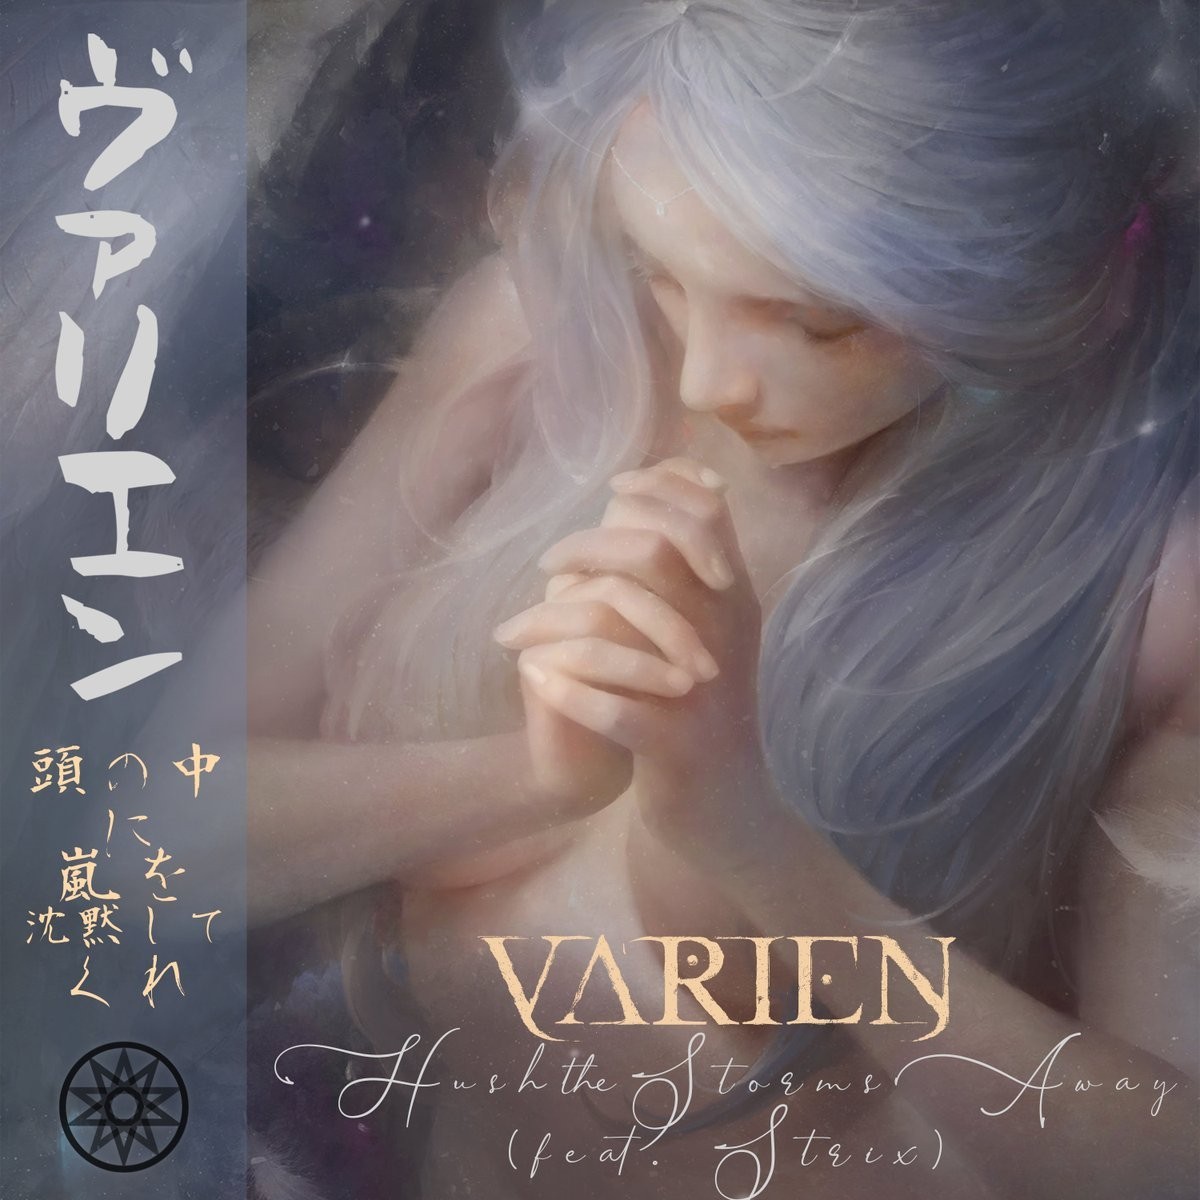 Varien featuring STRIX — Hush the Storms Away cover artwork